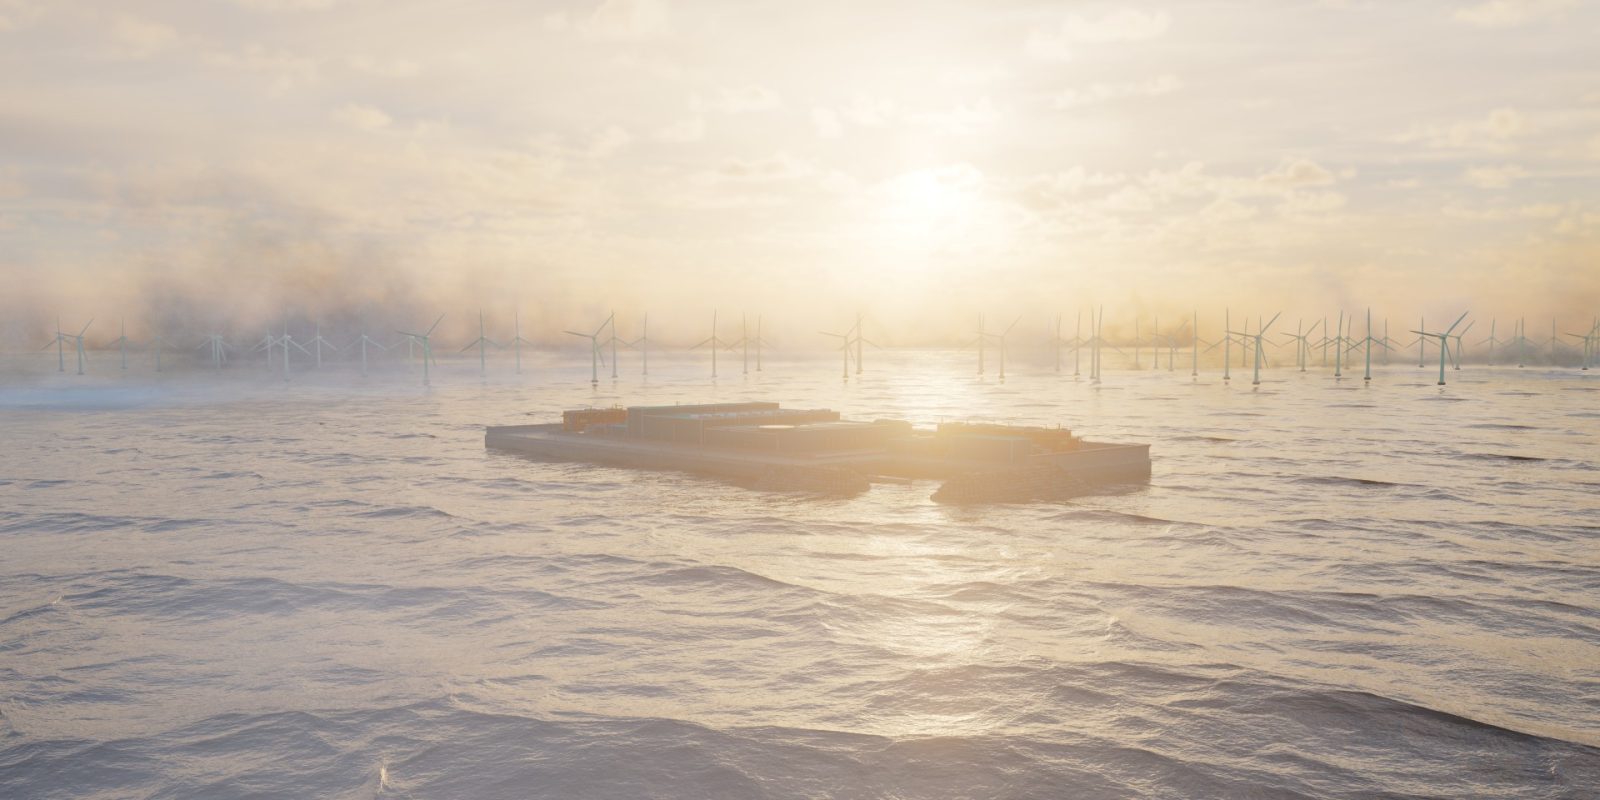 world's first artificial energy island